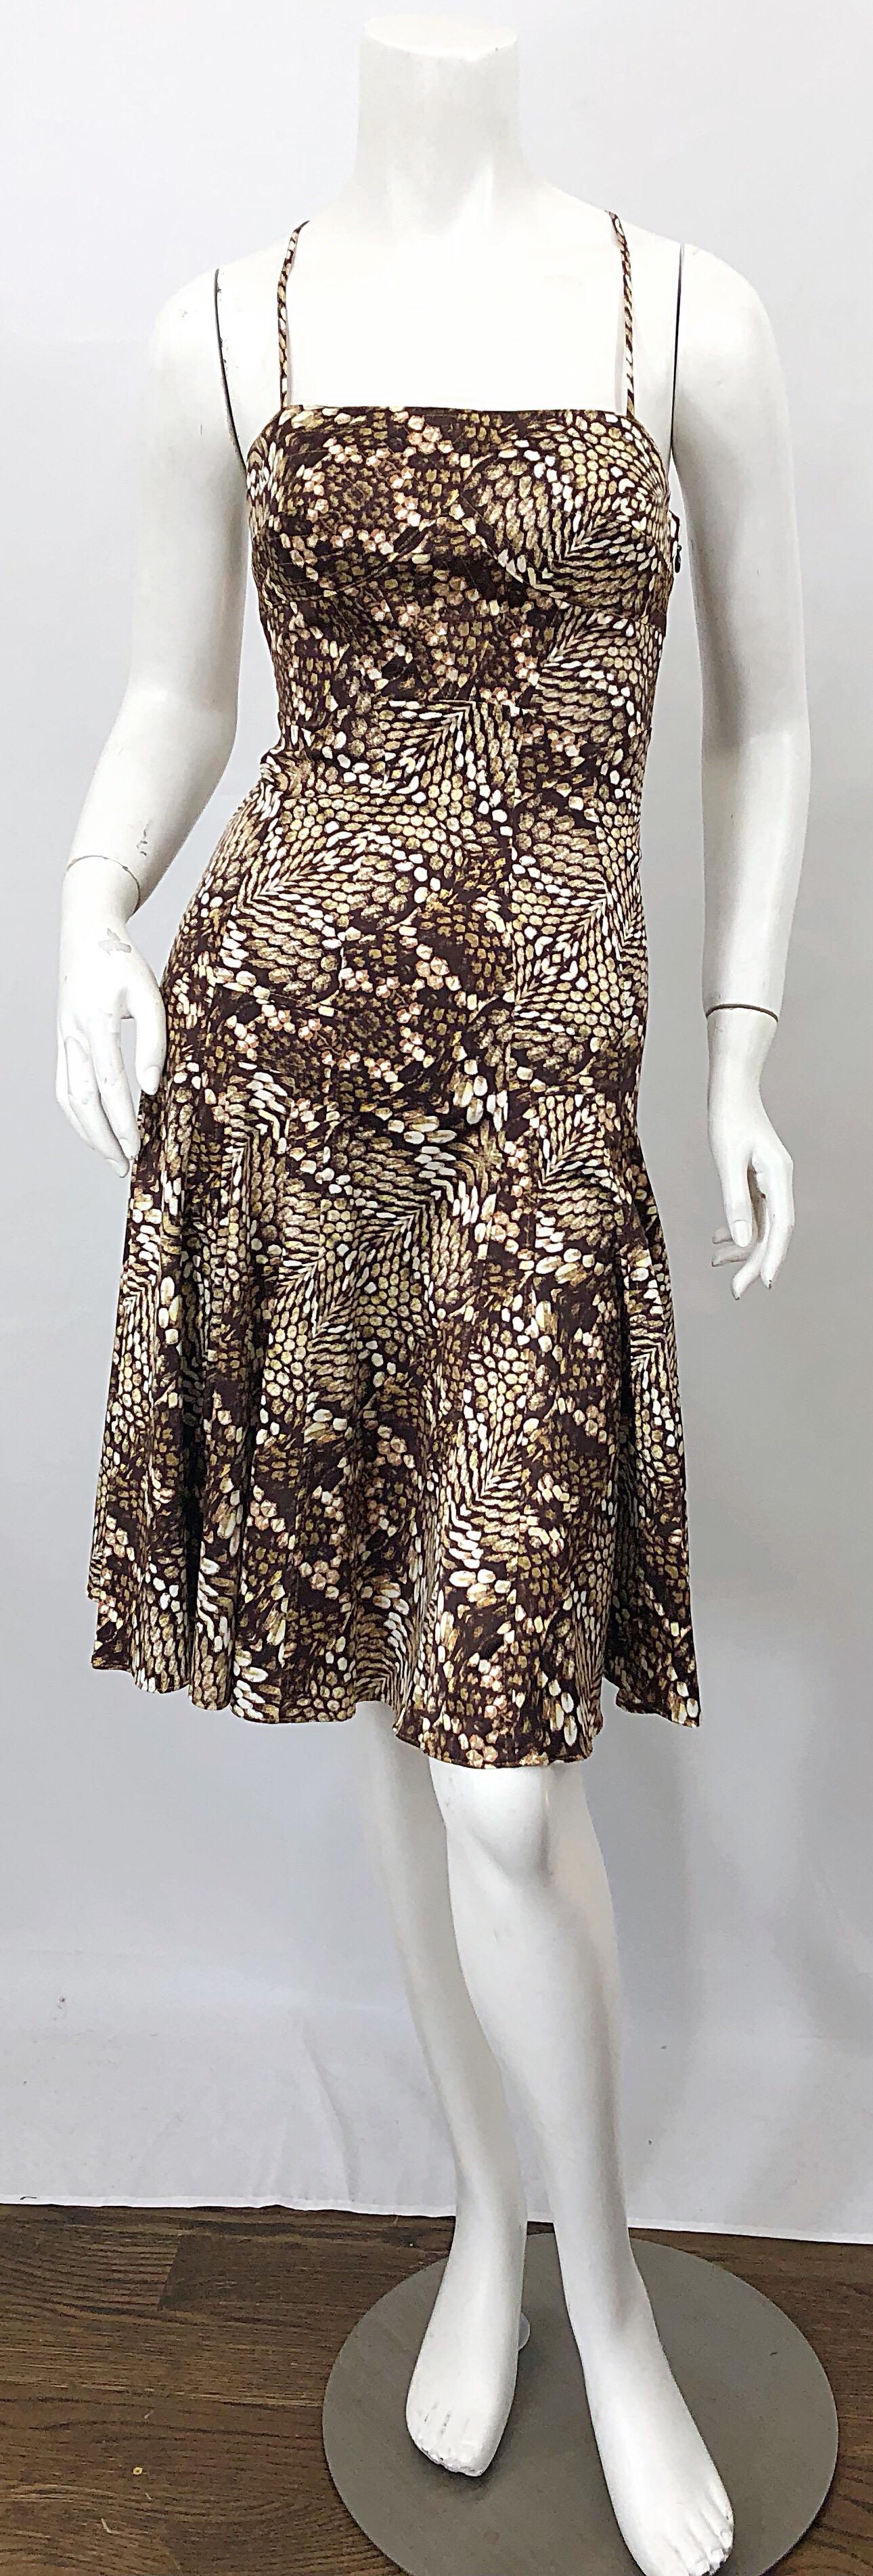 Flirty early 2000s ROBERTO CAVALLI brown and ivory snakeskin python animal print silk dress! Racerback straps with lucite and brass ring connecting the straps on the back. Fitted bodice with a flirty forgiving skirt. Hidden zipper up the side with